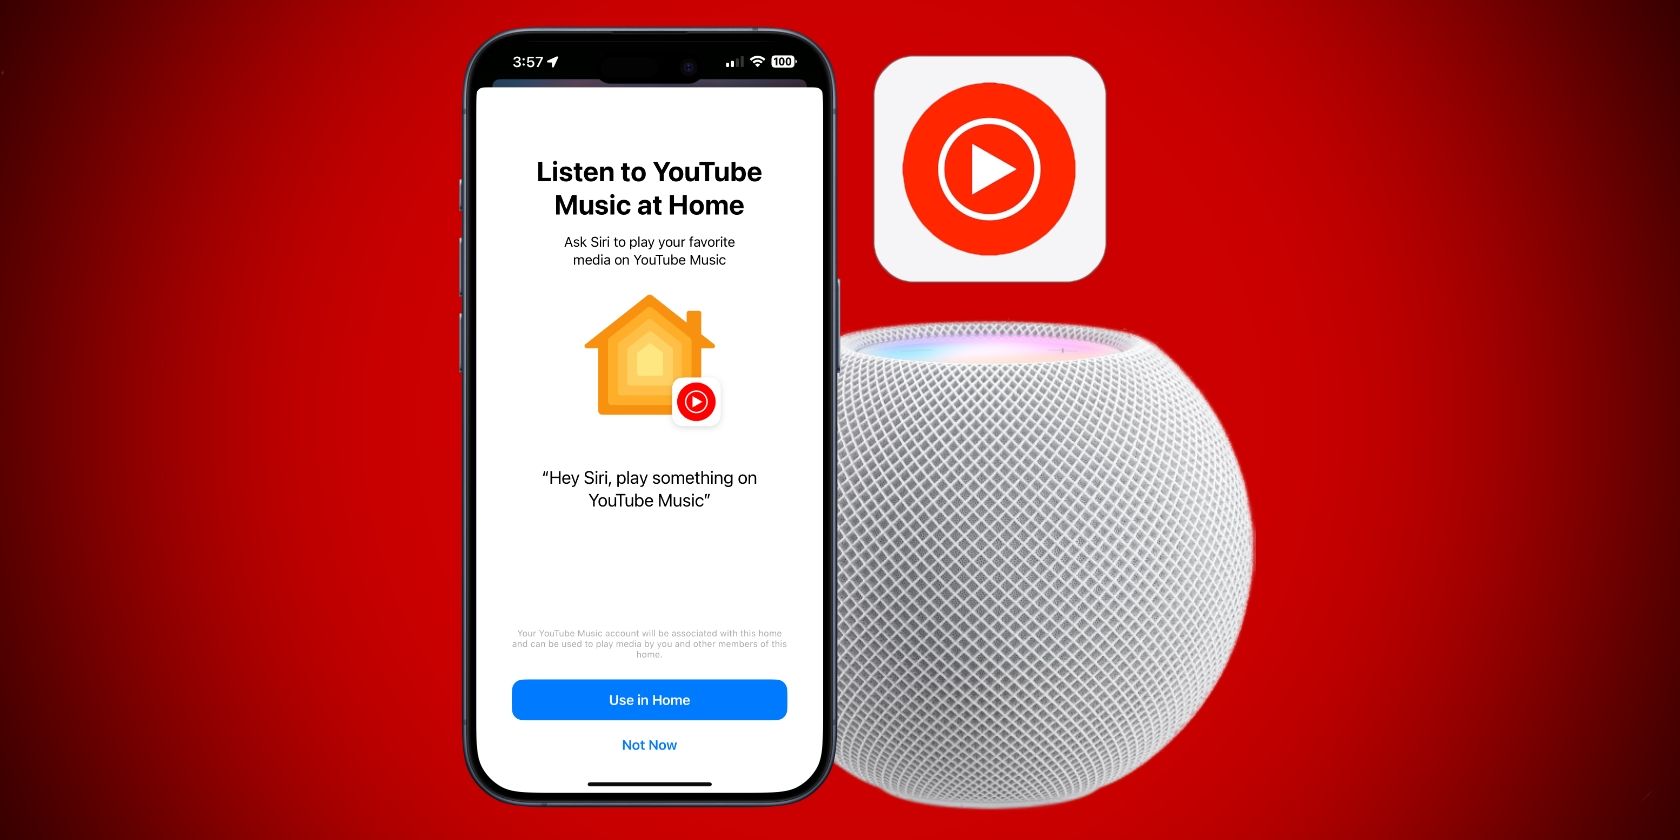 YouTube Music HomePod Integration Displayed on an iPhone next to a HomePod Mini on a Red Background